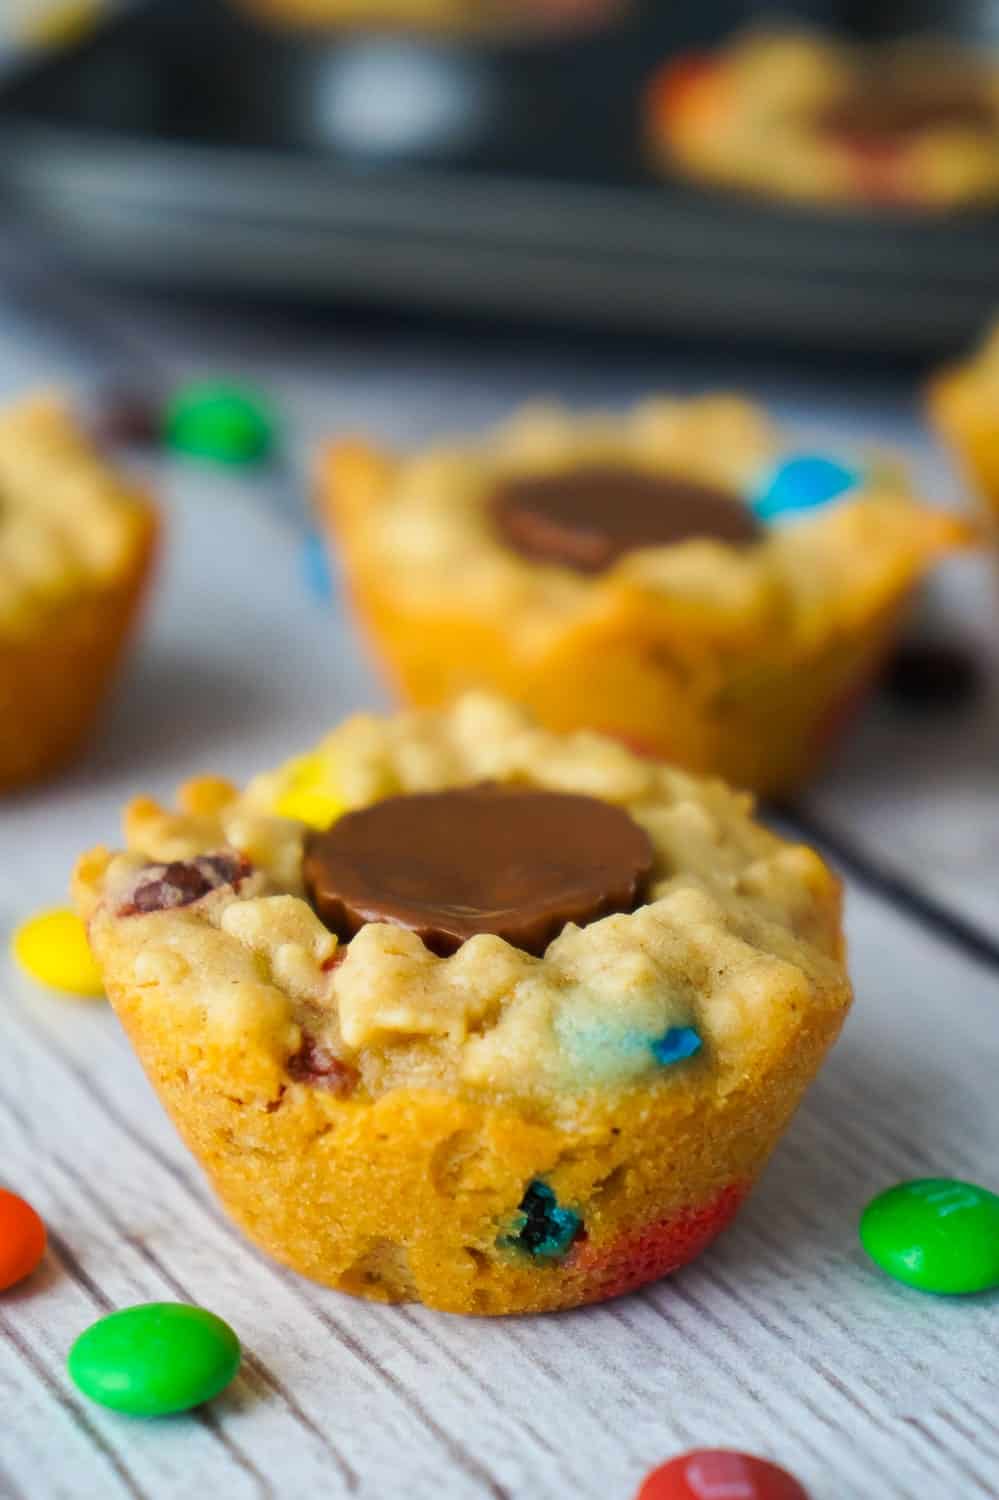 These Peanut Butter Cup Stuffed Monster Cookie Cups are a fun and easy dessert recipes. The oatmeal peanut butter cookies are loaded with mini M&Ms and each cookie cup has one mini Reese's peanut butter cup pressed into the center.